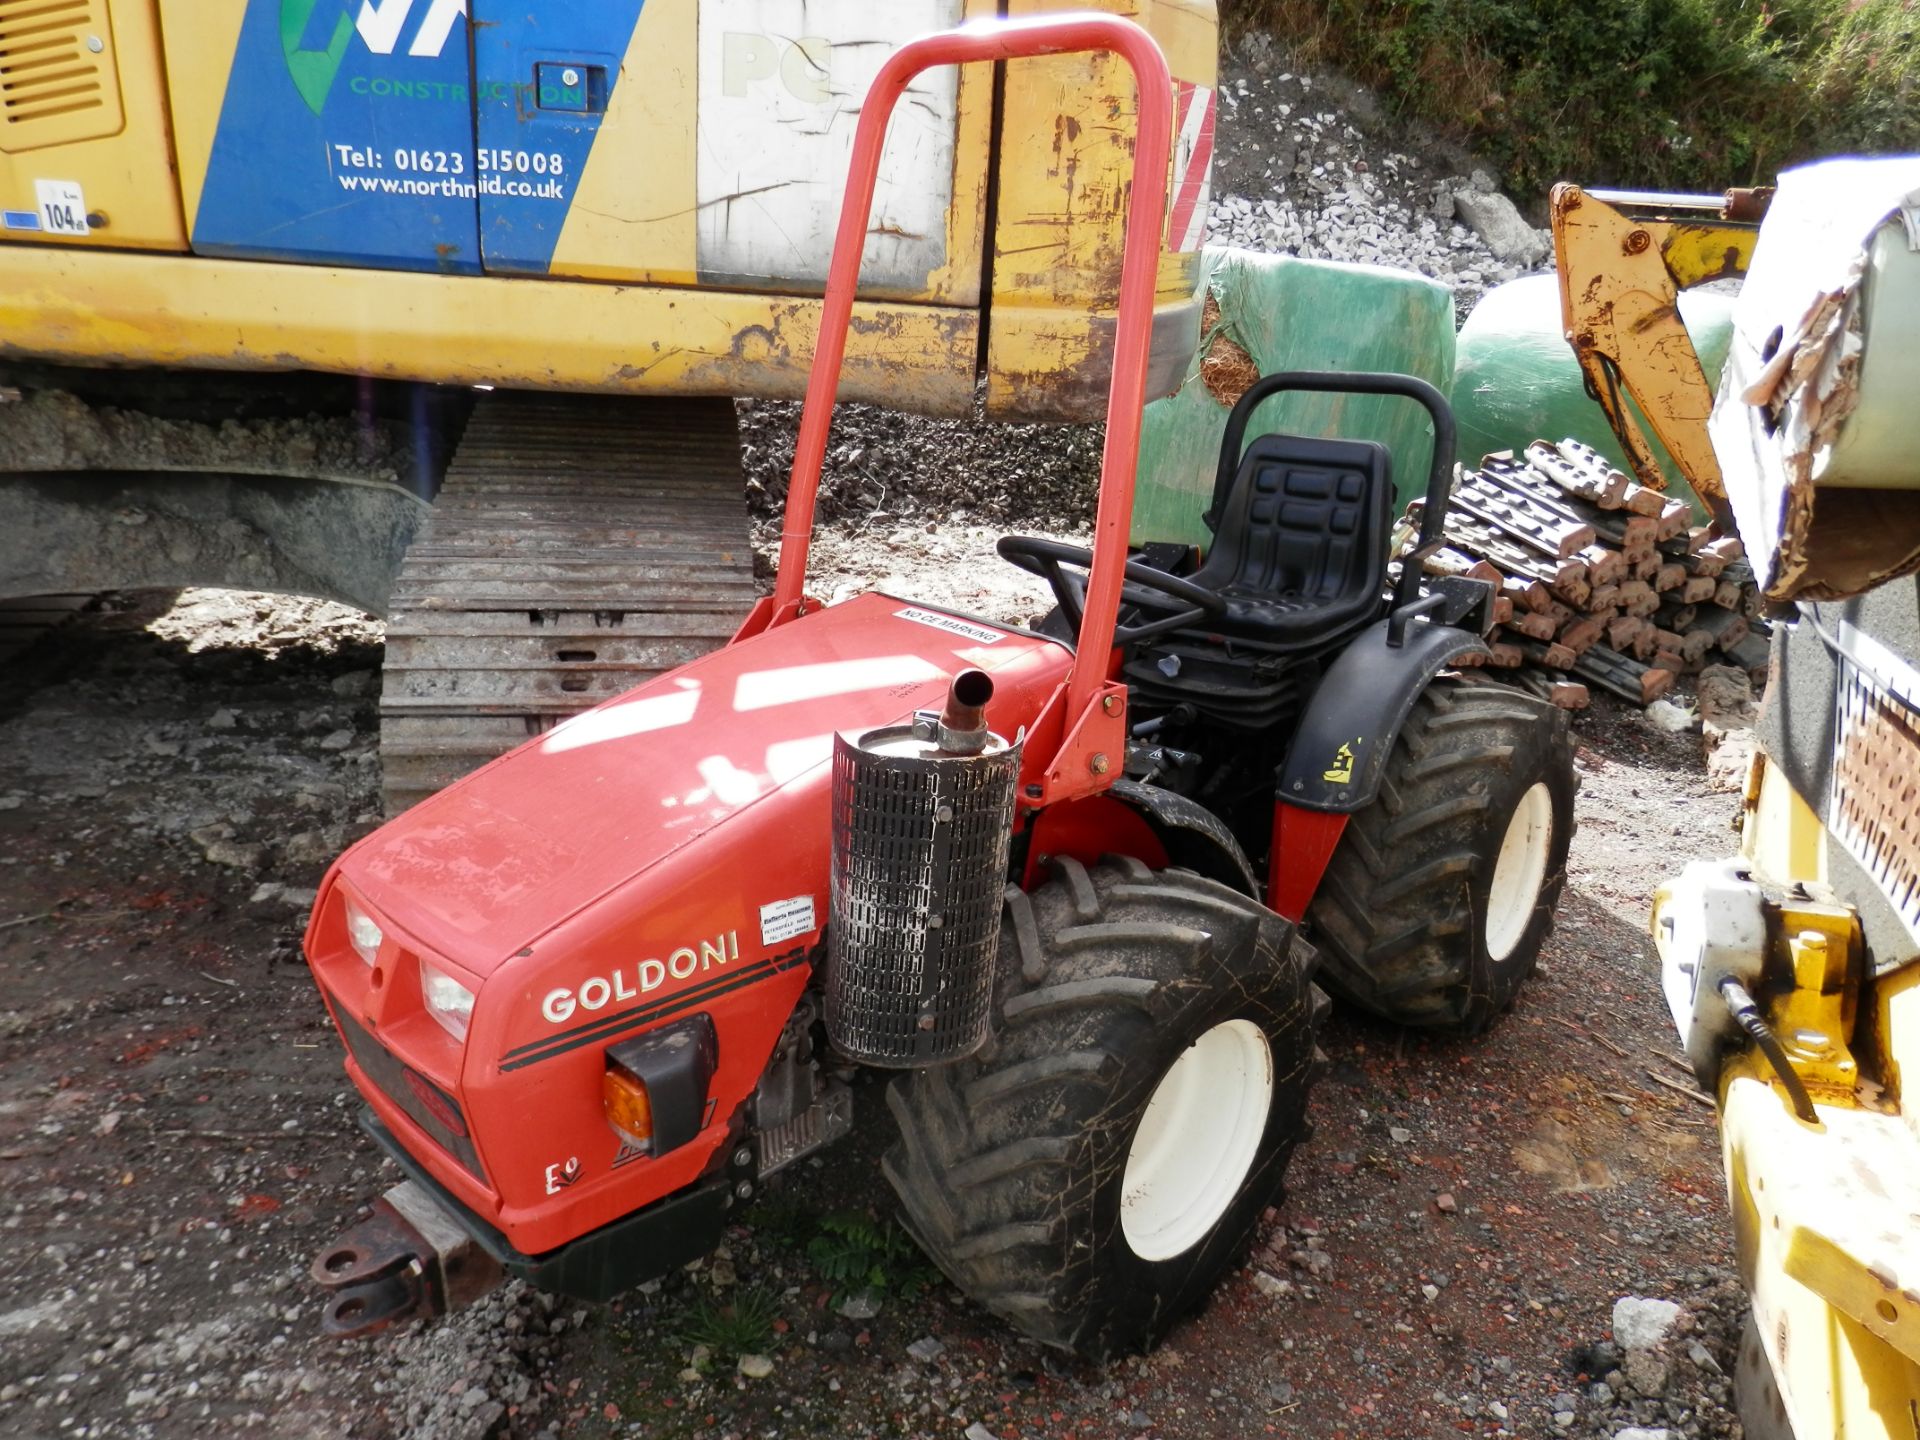 GOLDONI 1500 KG 21A, COMPACT DIESEL TRACTOR. READY FOR WORK.